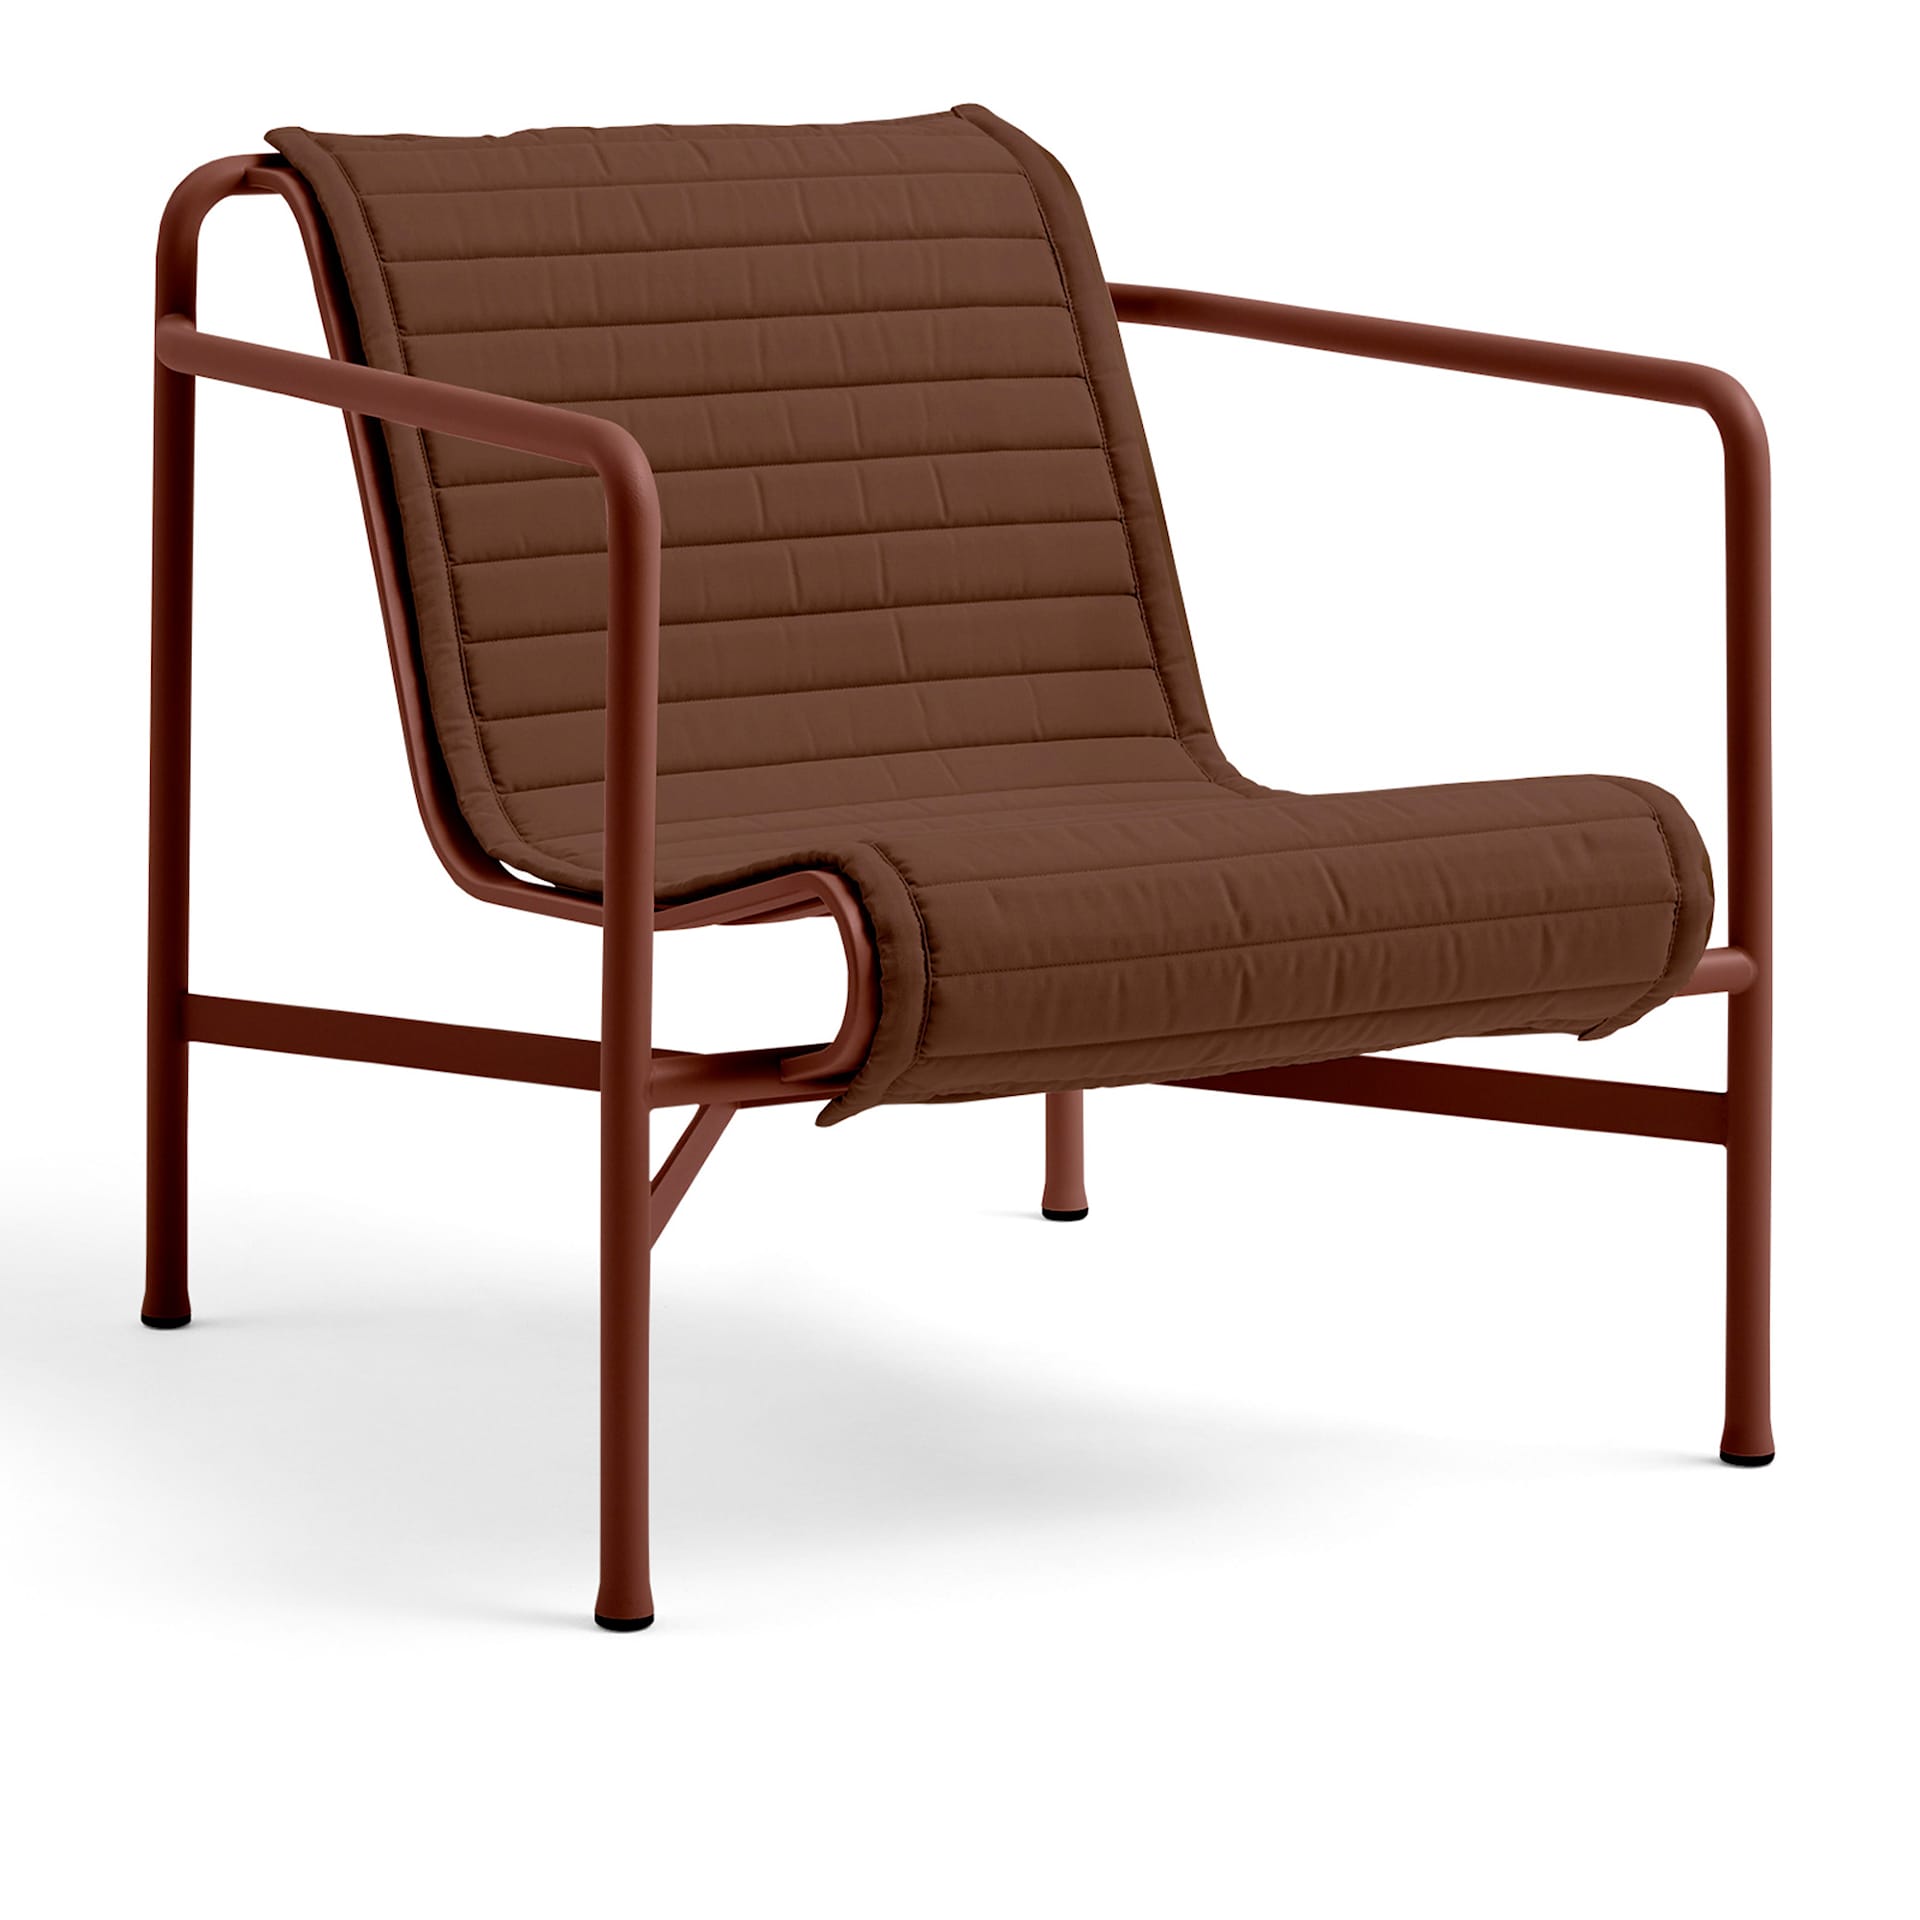 Soft Quilted Cushion for Palissade Lounge Chair Low - HAY - Ronan & Erwan Bouroullec - NO GA